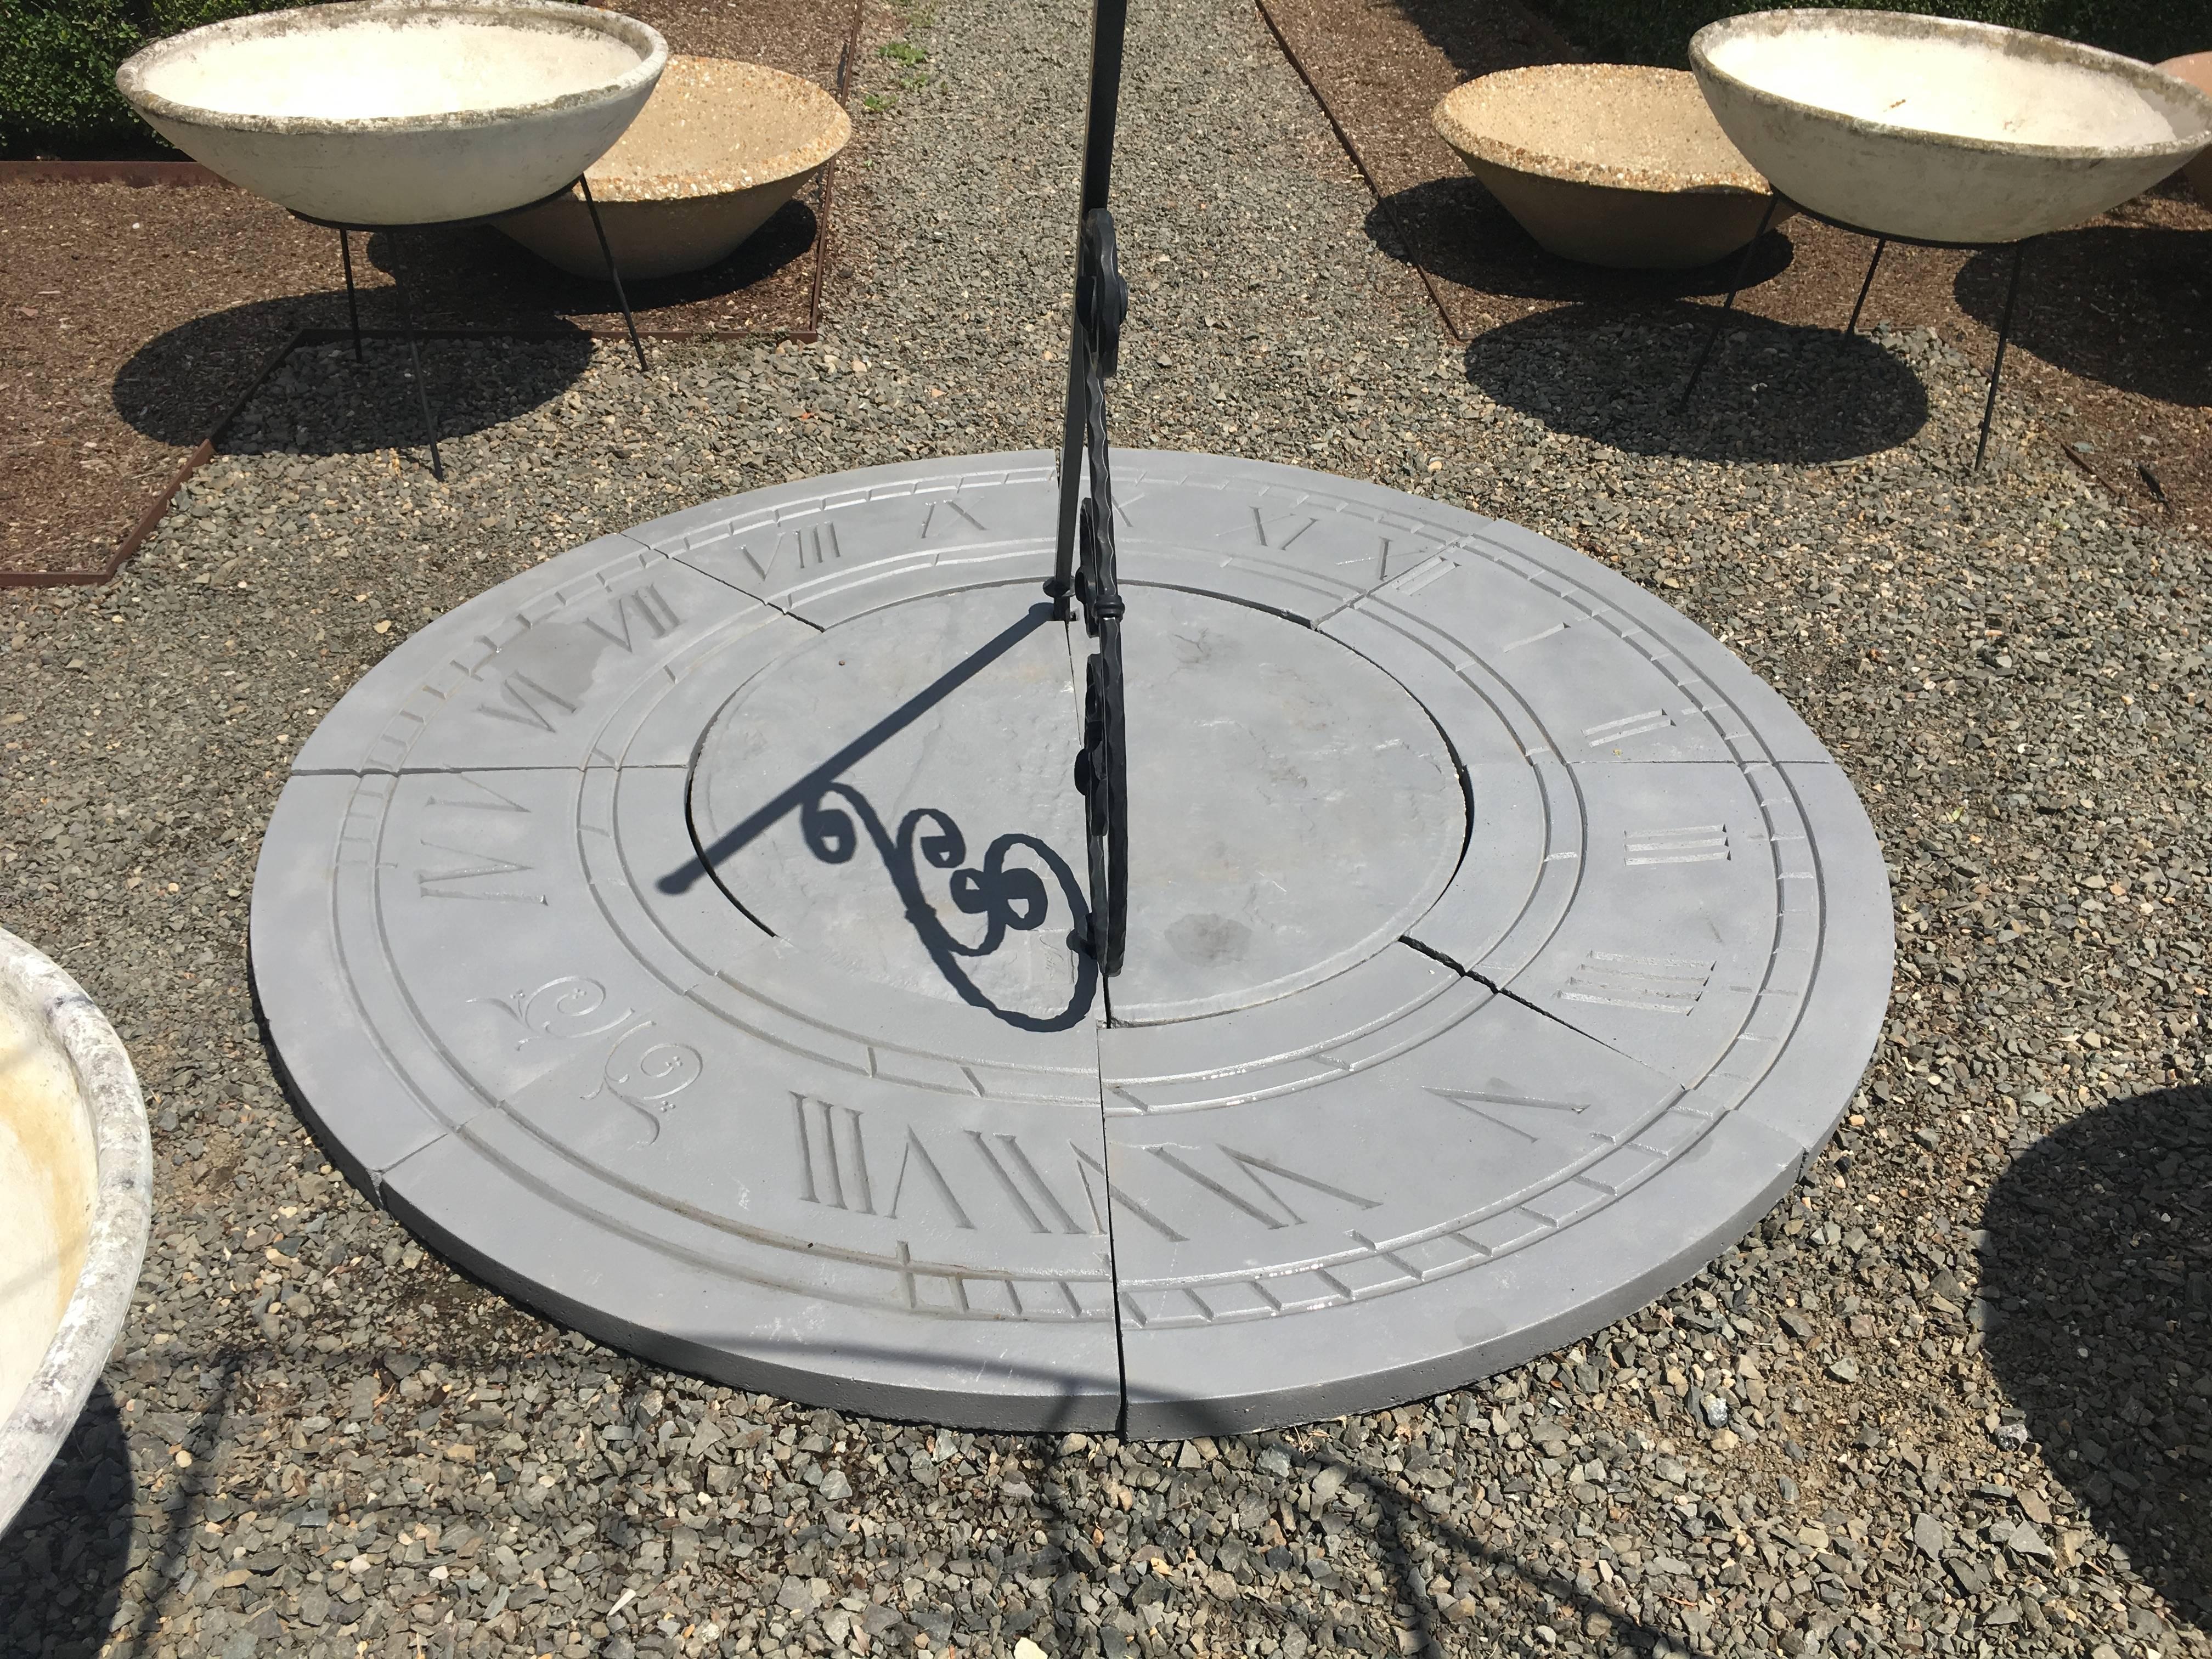 Without a doubt, this is the most unique piece we've unearthed all season! Fabricated from six foot diameter cast stone in 10 contiguous pieces and topped with an immense aluminum gnomon (sundial pointer), this sundial is meant to be installed at